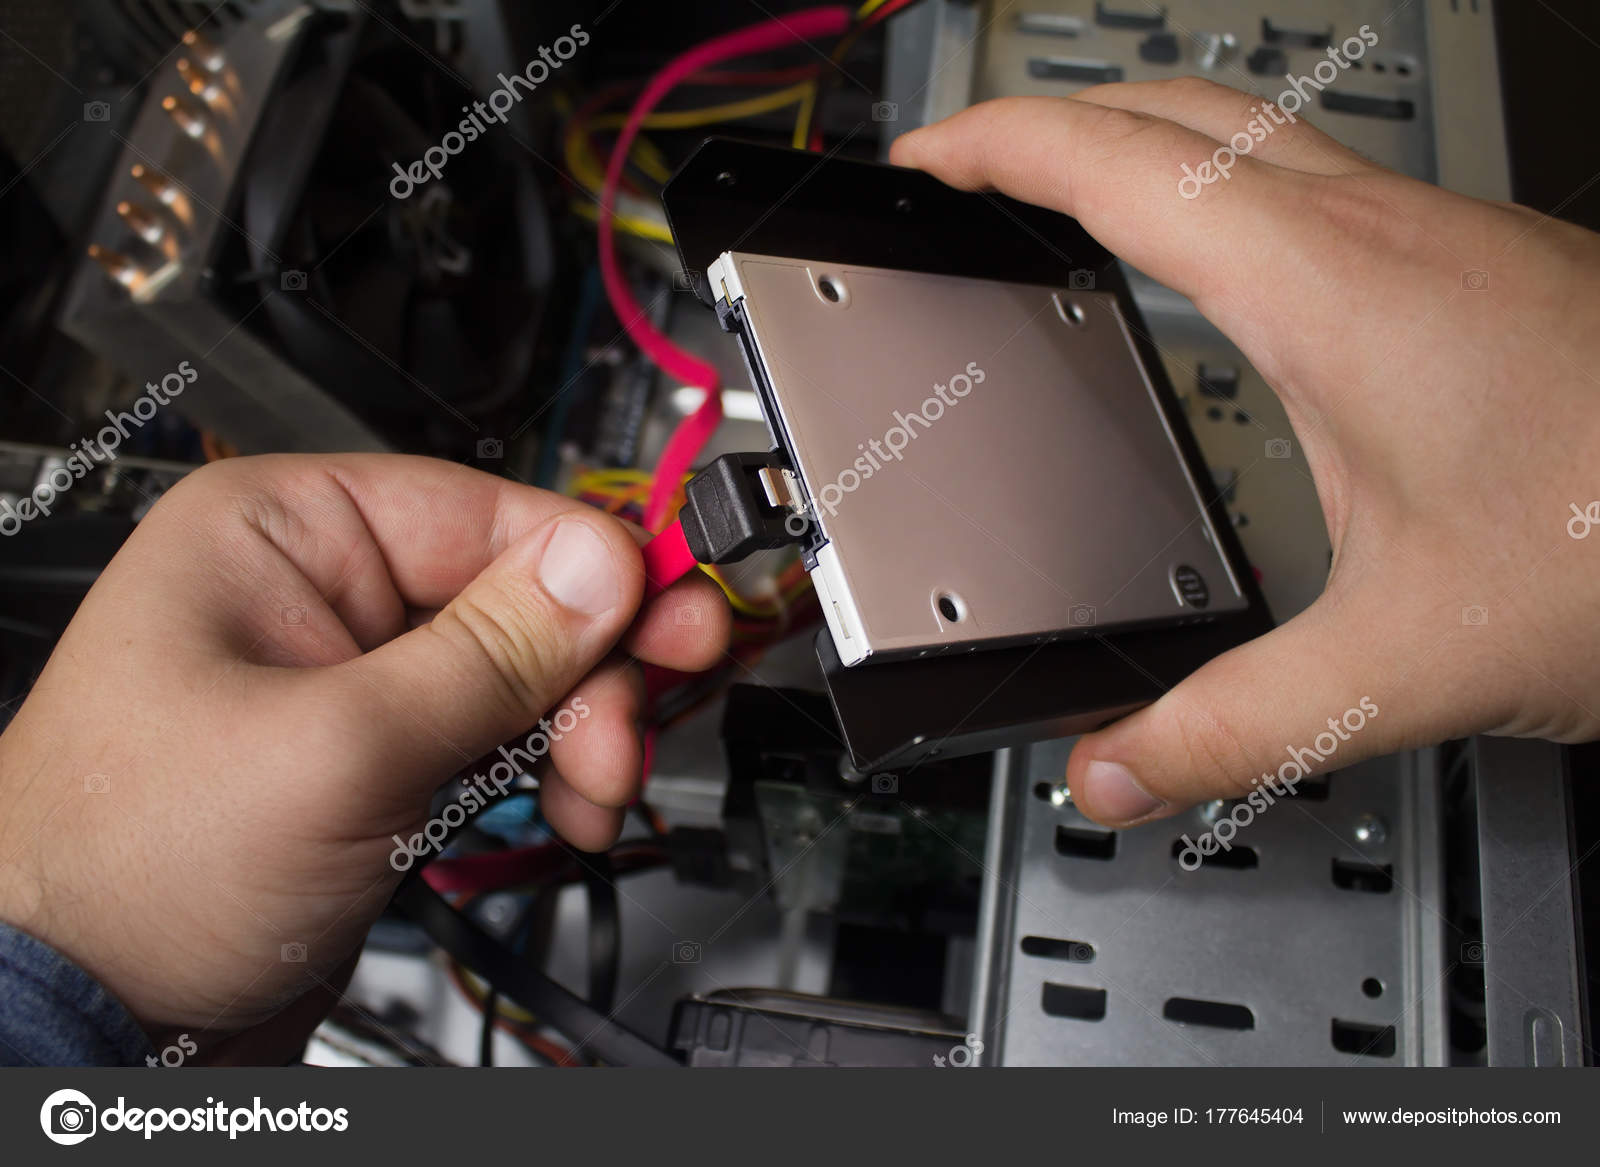 Provisional You're welcome Maneuver Ssd installation Stock Photos, Royalty Free Ssd installation Images |  Depositphotos